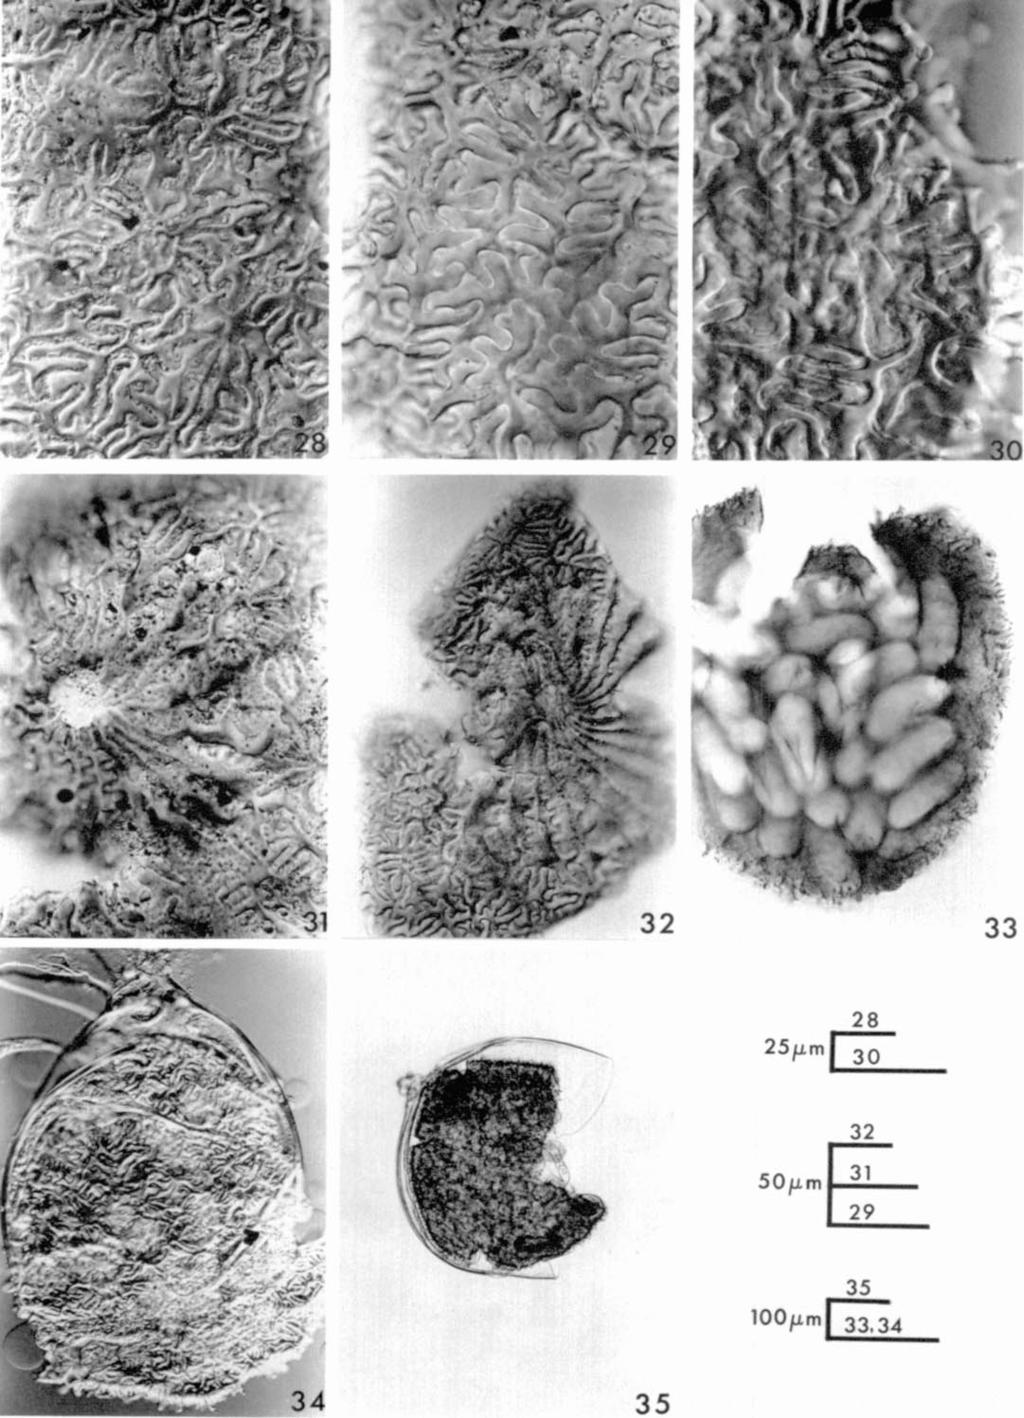 Photomicrographs of cystoid bodies of Meloidoderita polygoni n. sp.